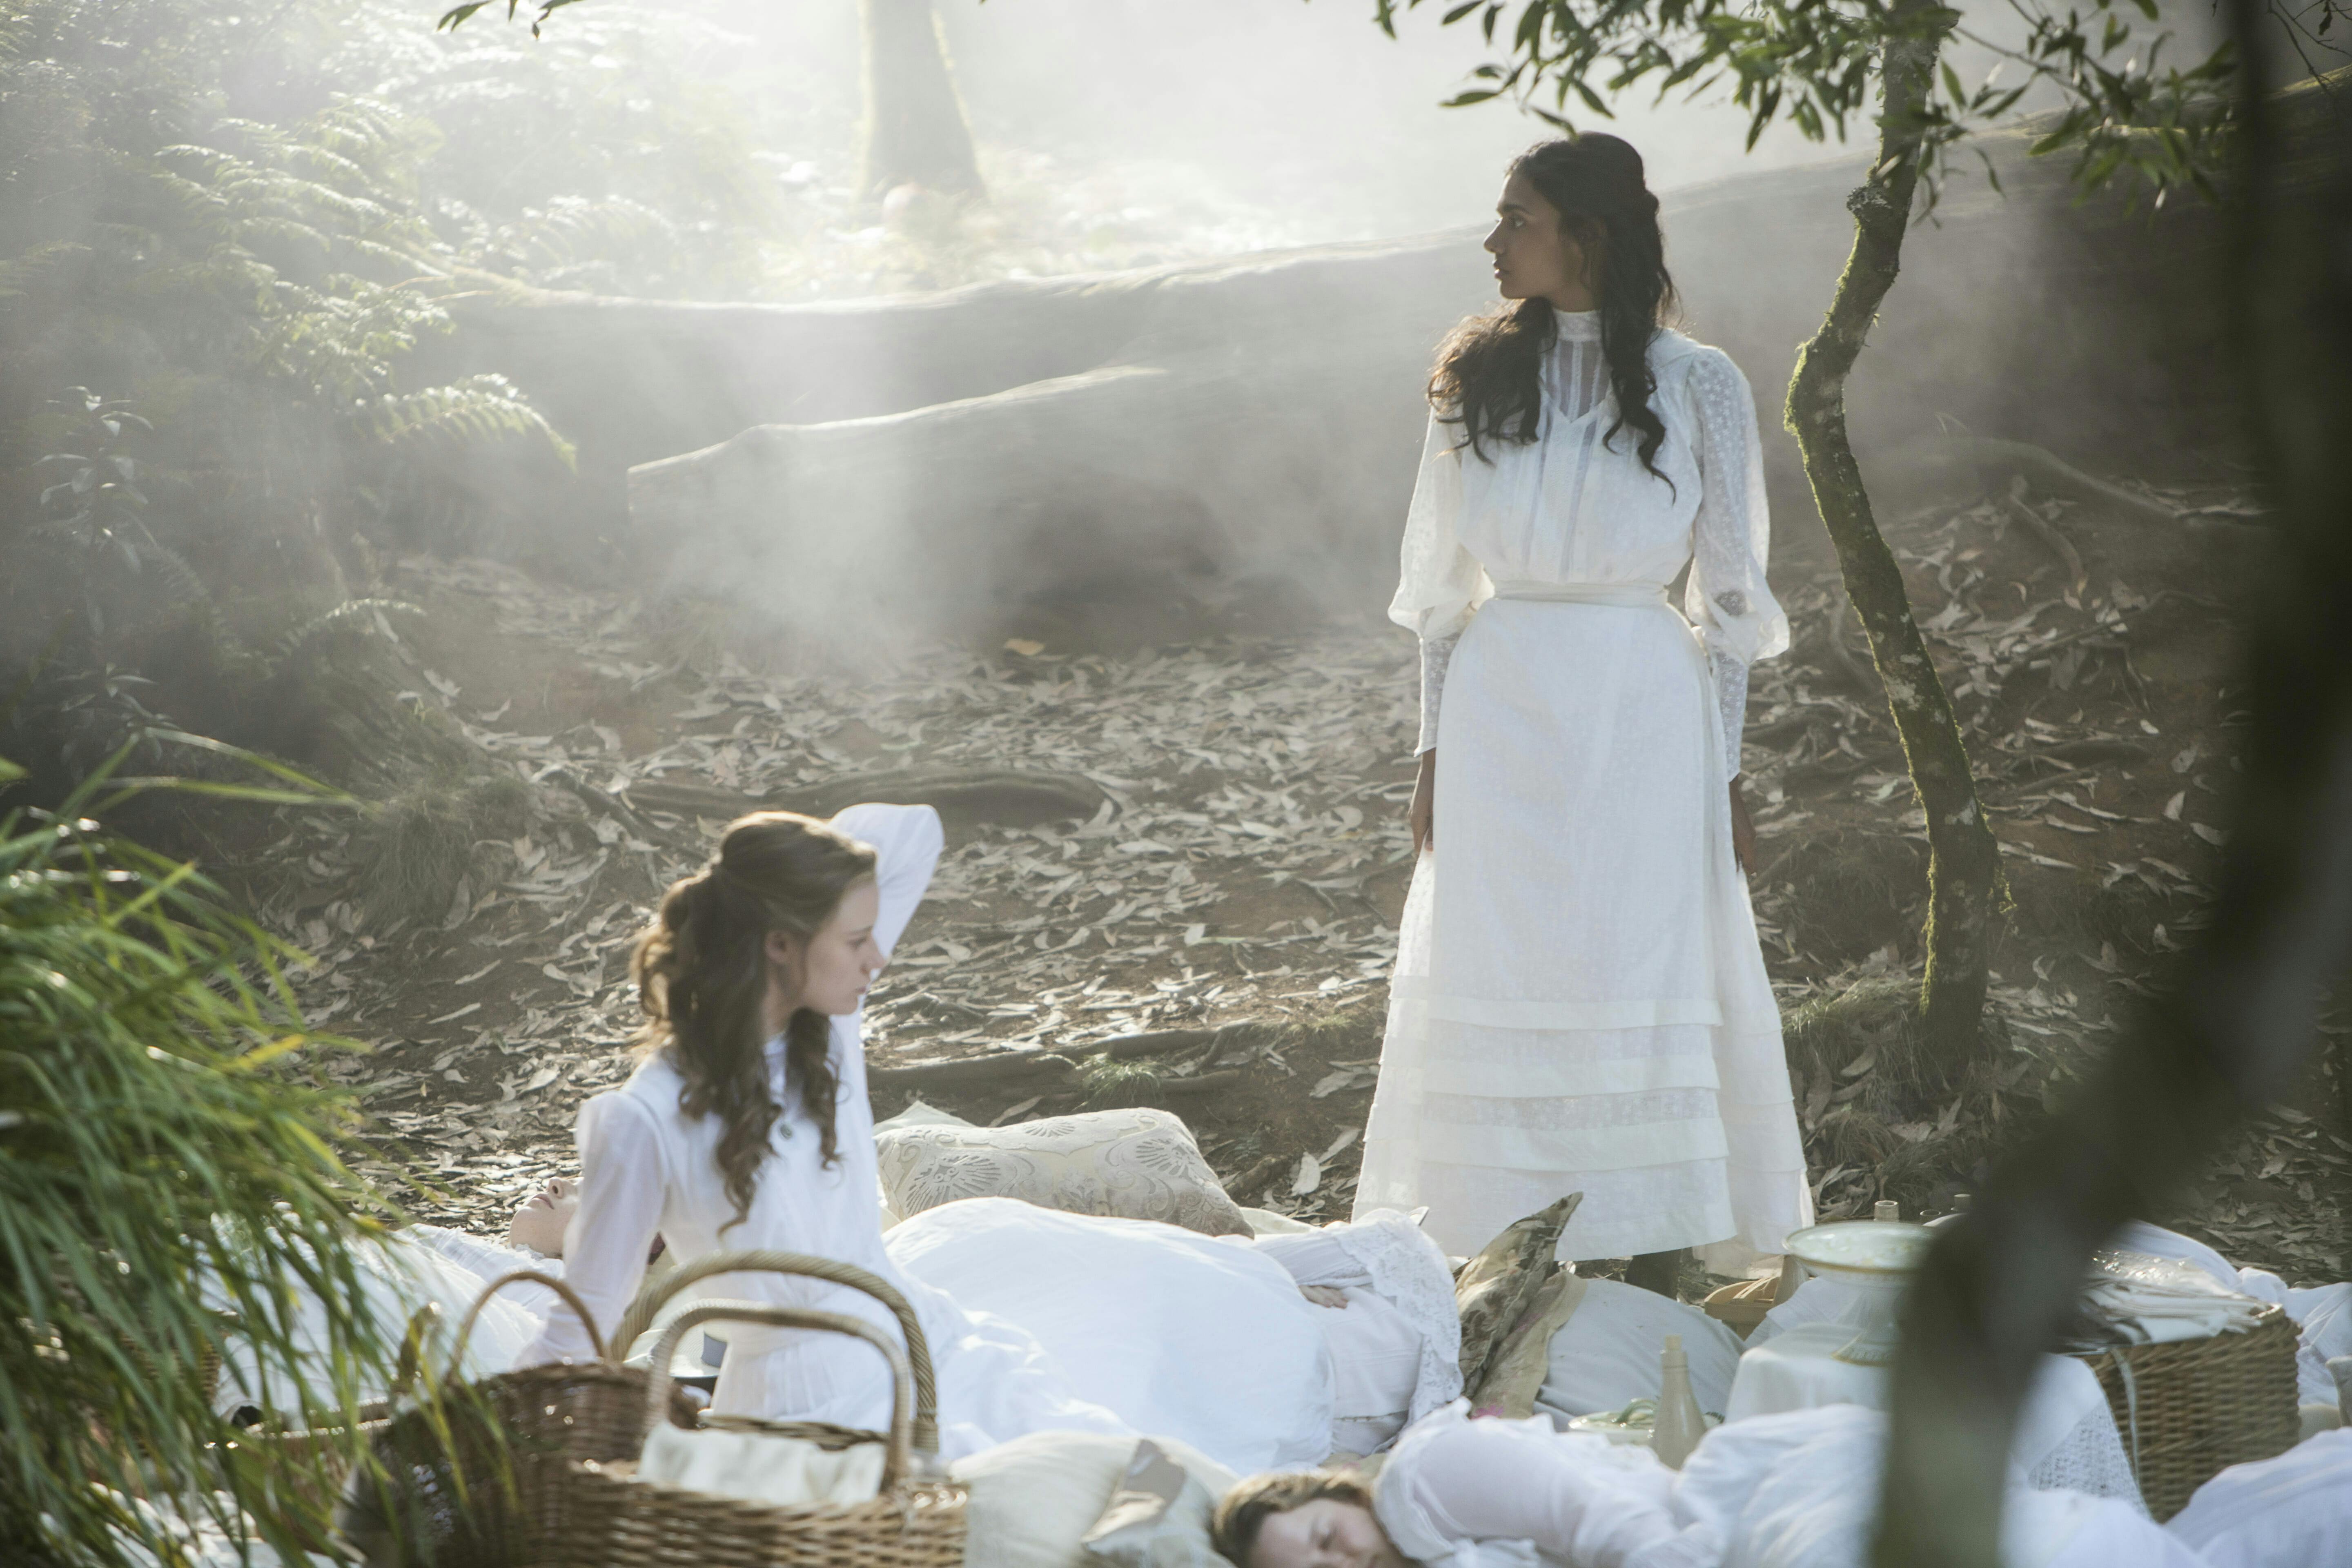 what's new on amazon prime - picnic at hanging rock